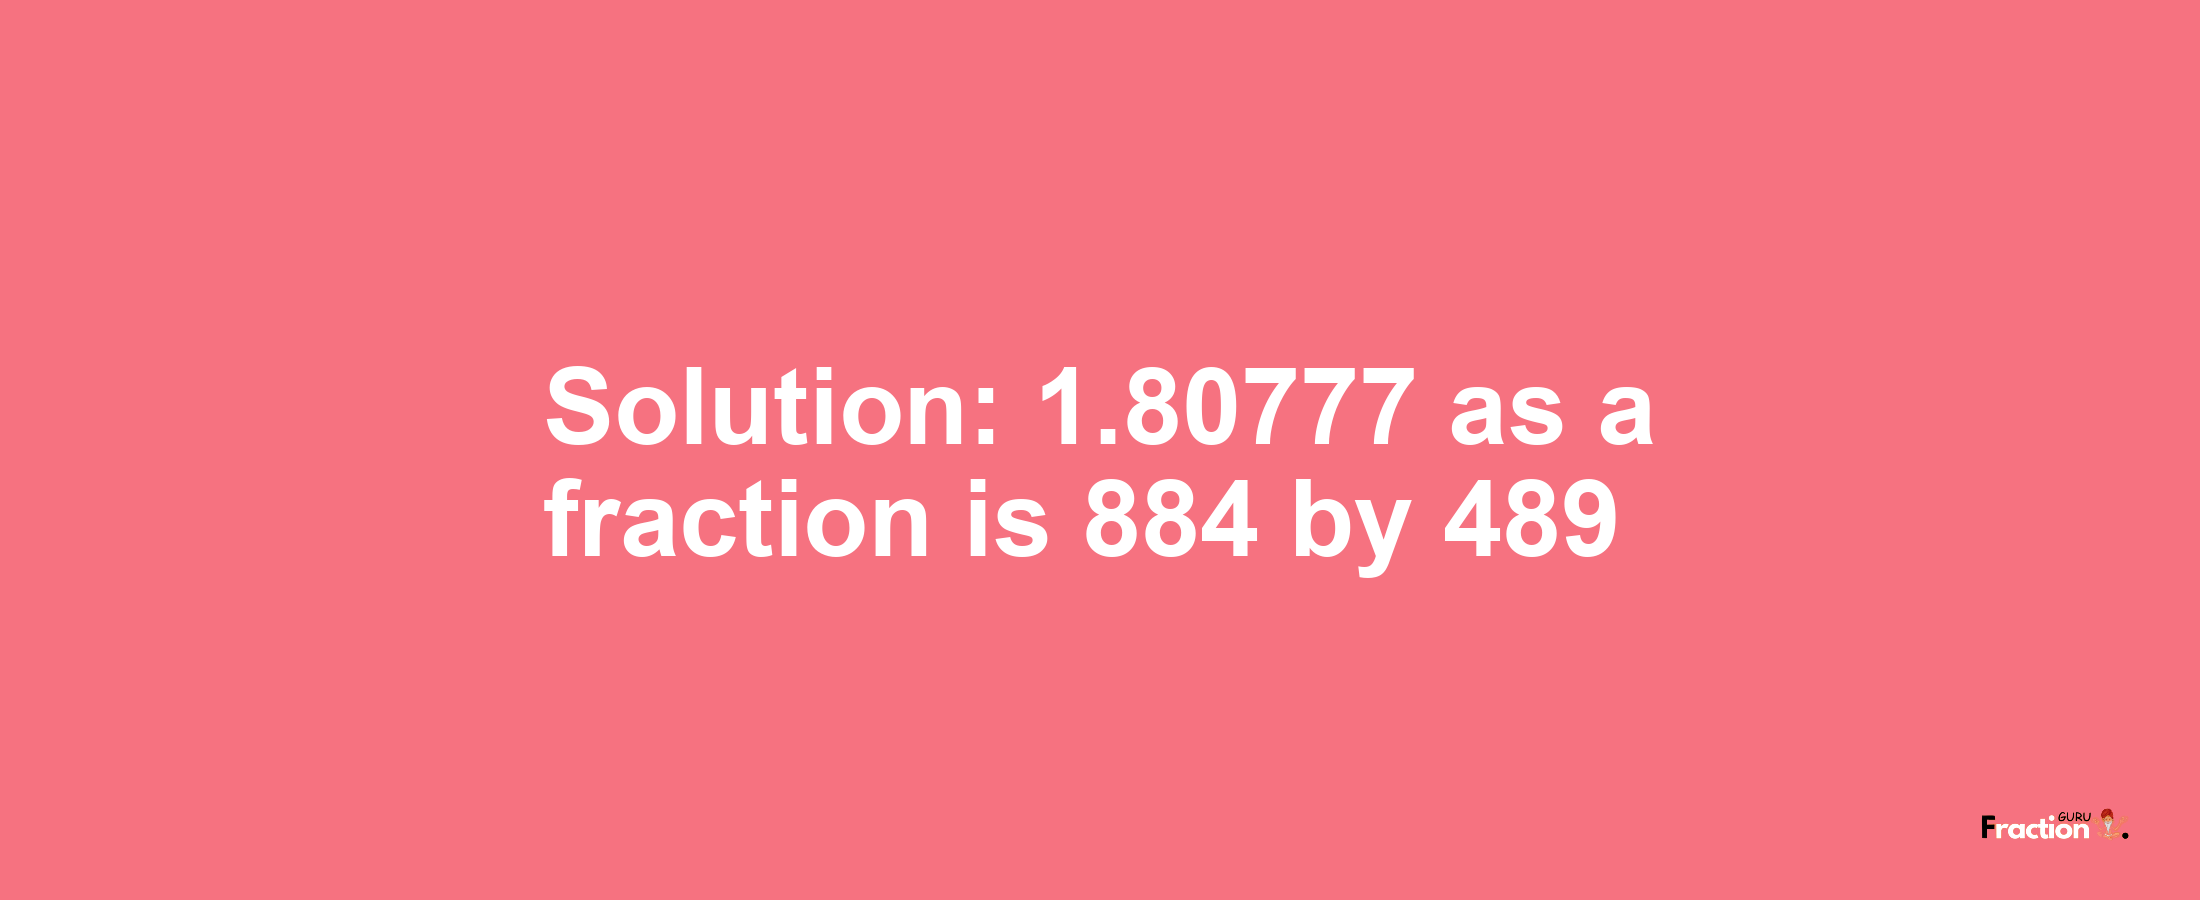 Solution:1.80777 as a fraction is 884/489